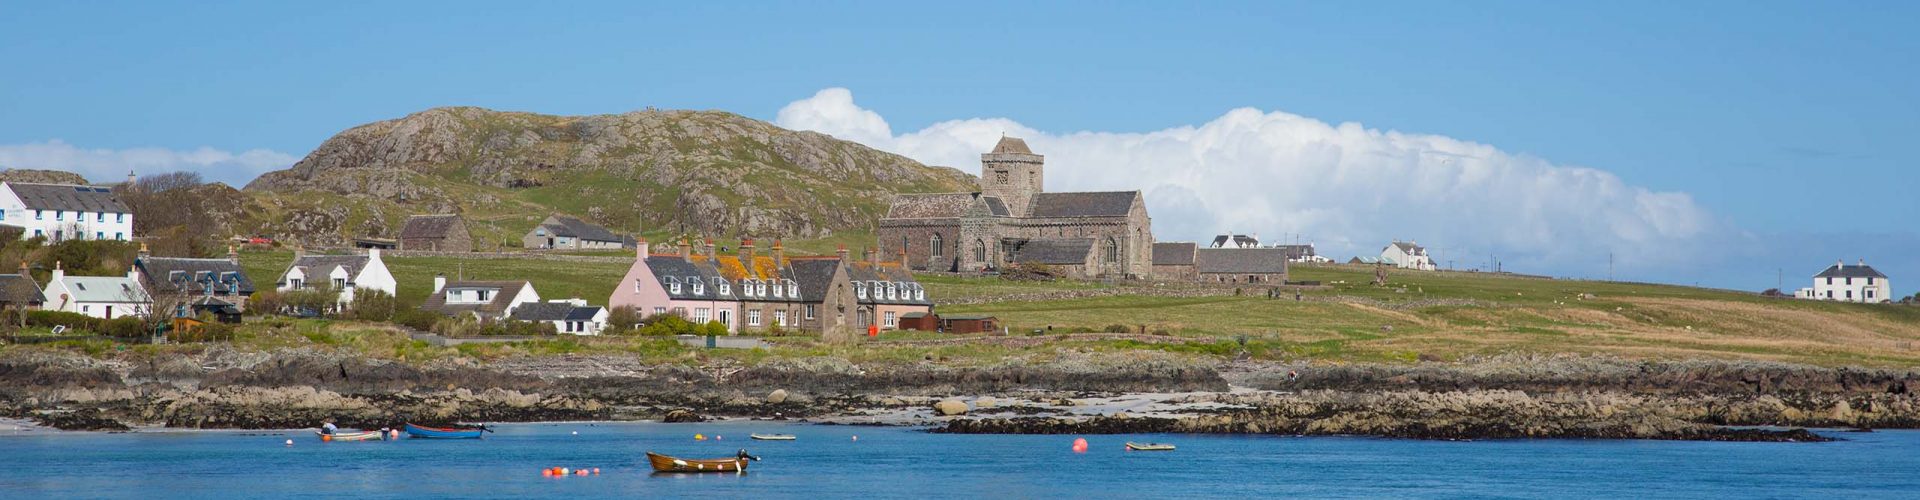 A panorama view from the bay of Iona Abbey on the Isle of Iona